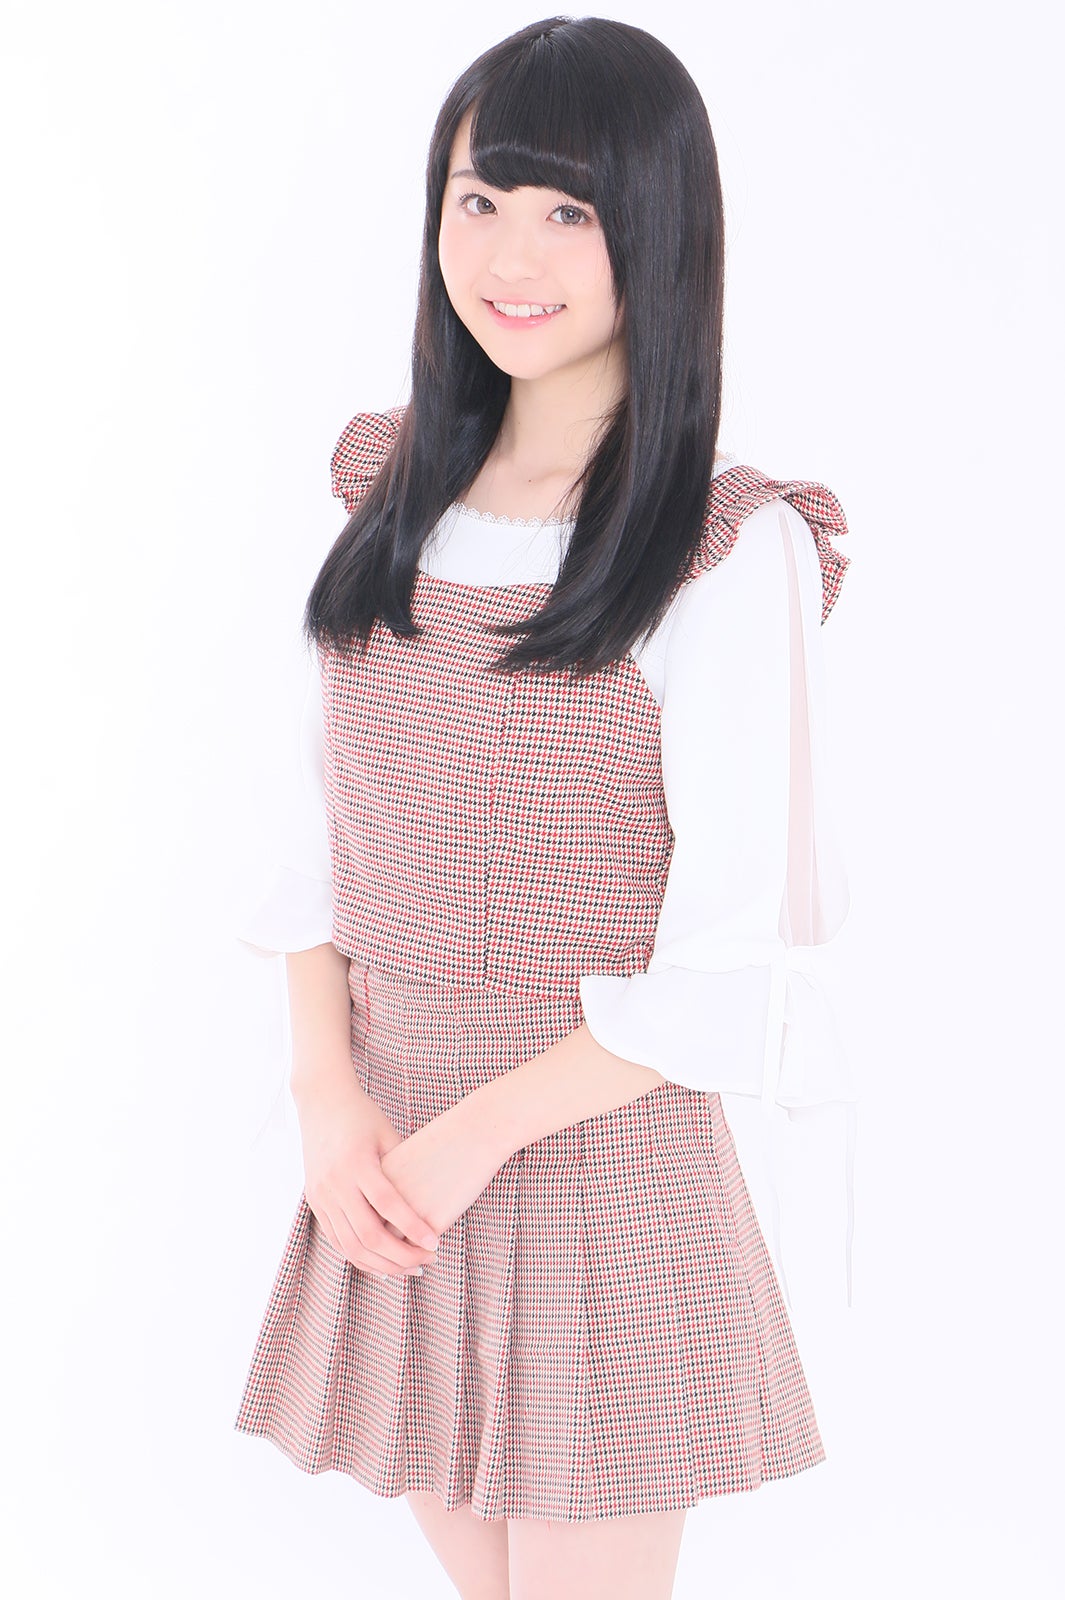 Images Of 斉藤奈々 Japaneseclass Jp